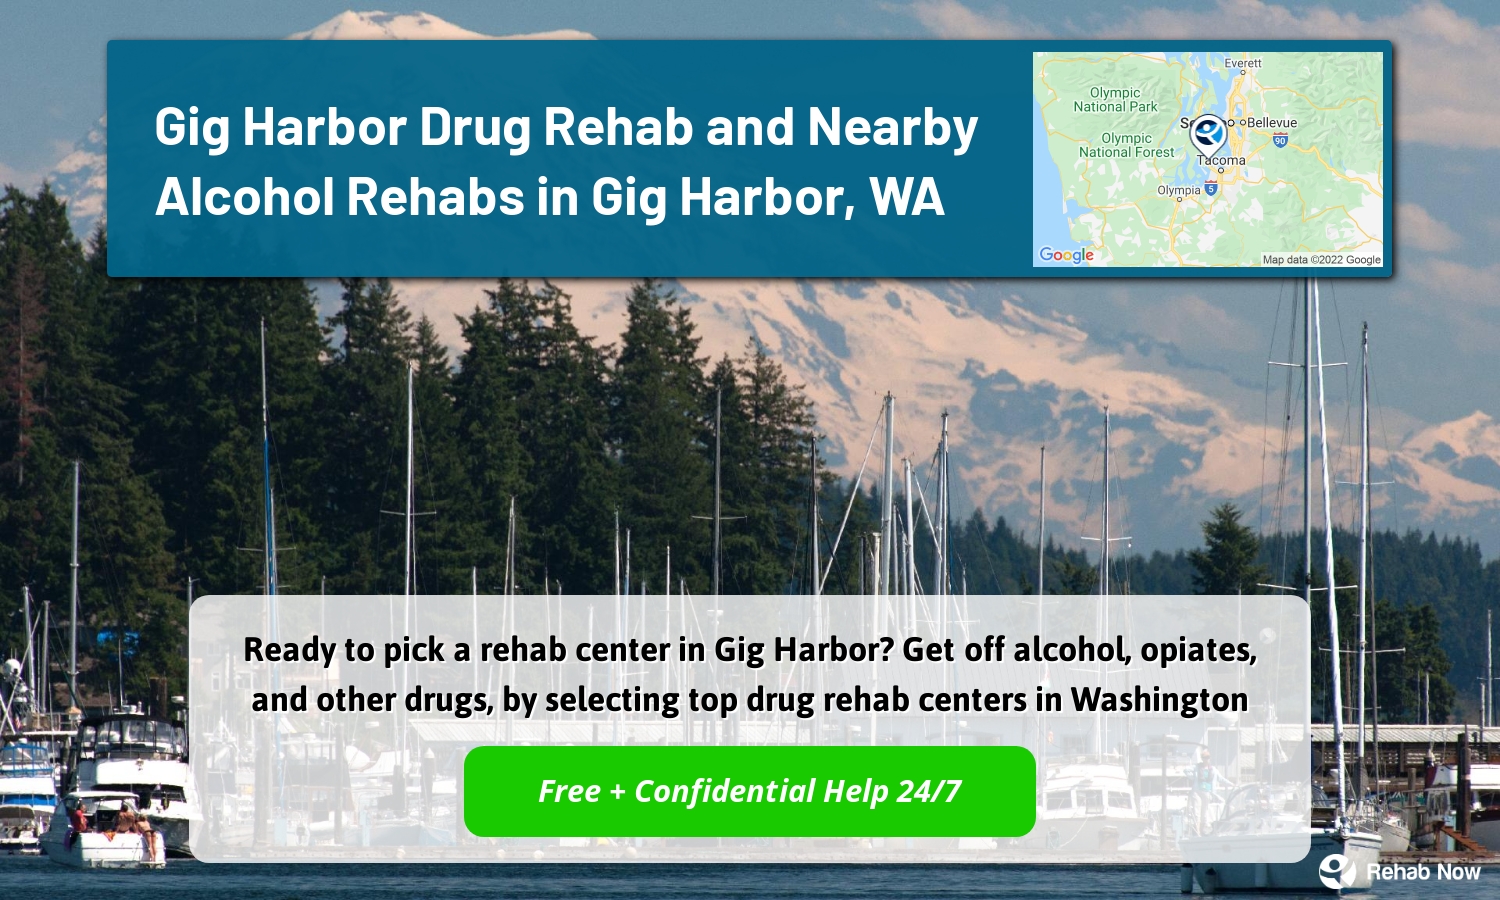 Ready to pick a rehab center in Gig Harbor? Get off alcohol, opiates, and other drugs, by selecting top drug rehab centers in Washington